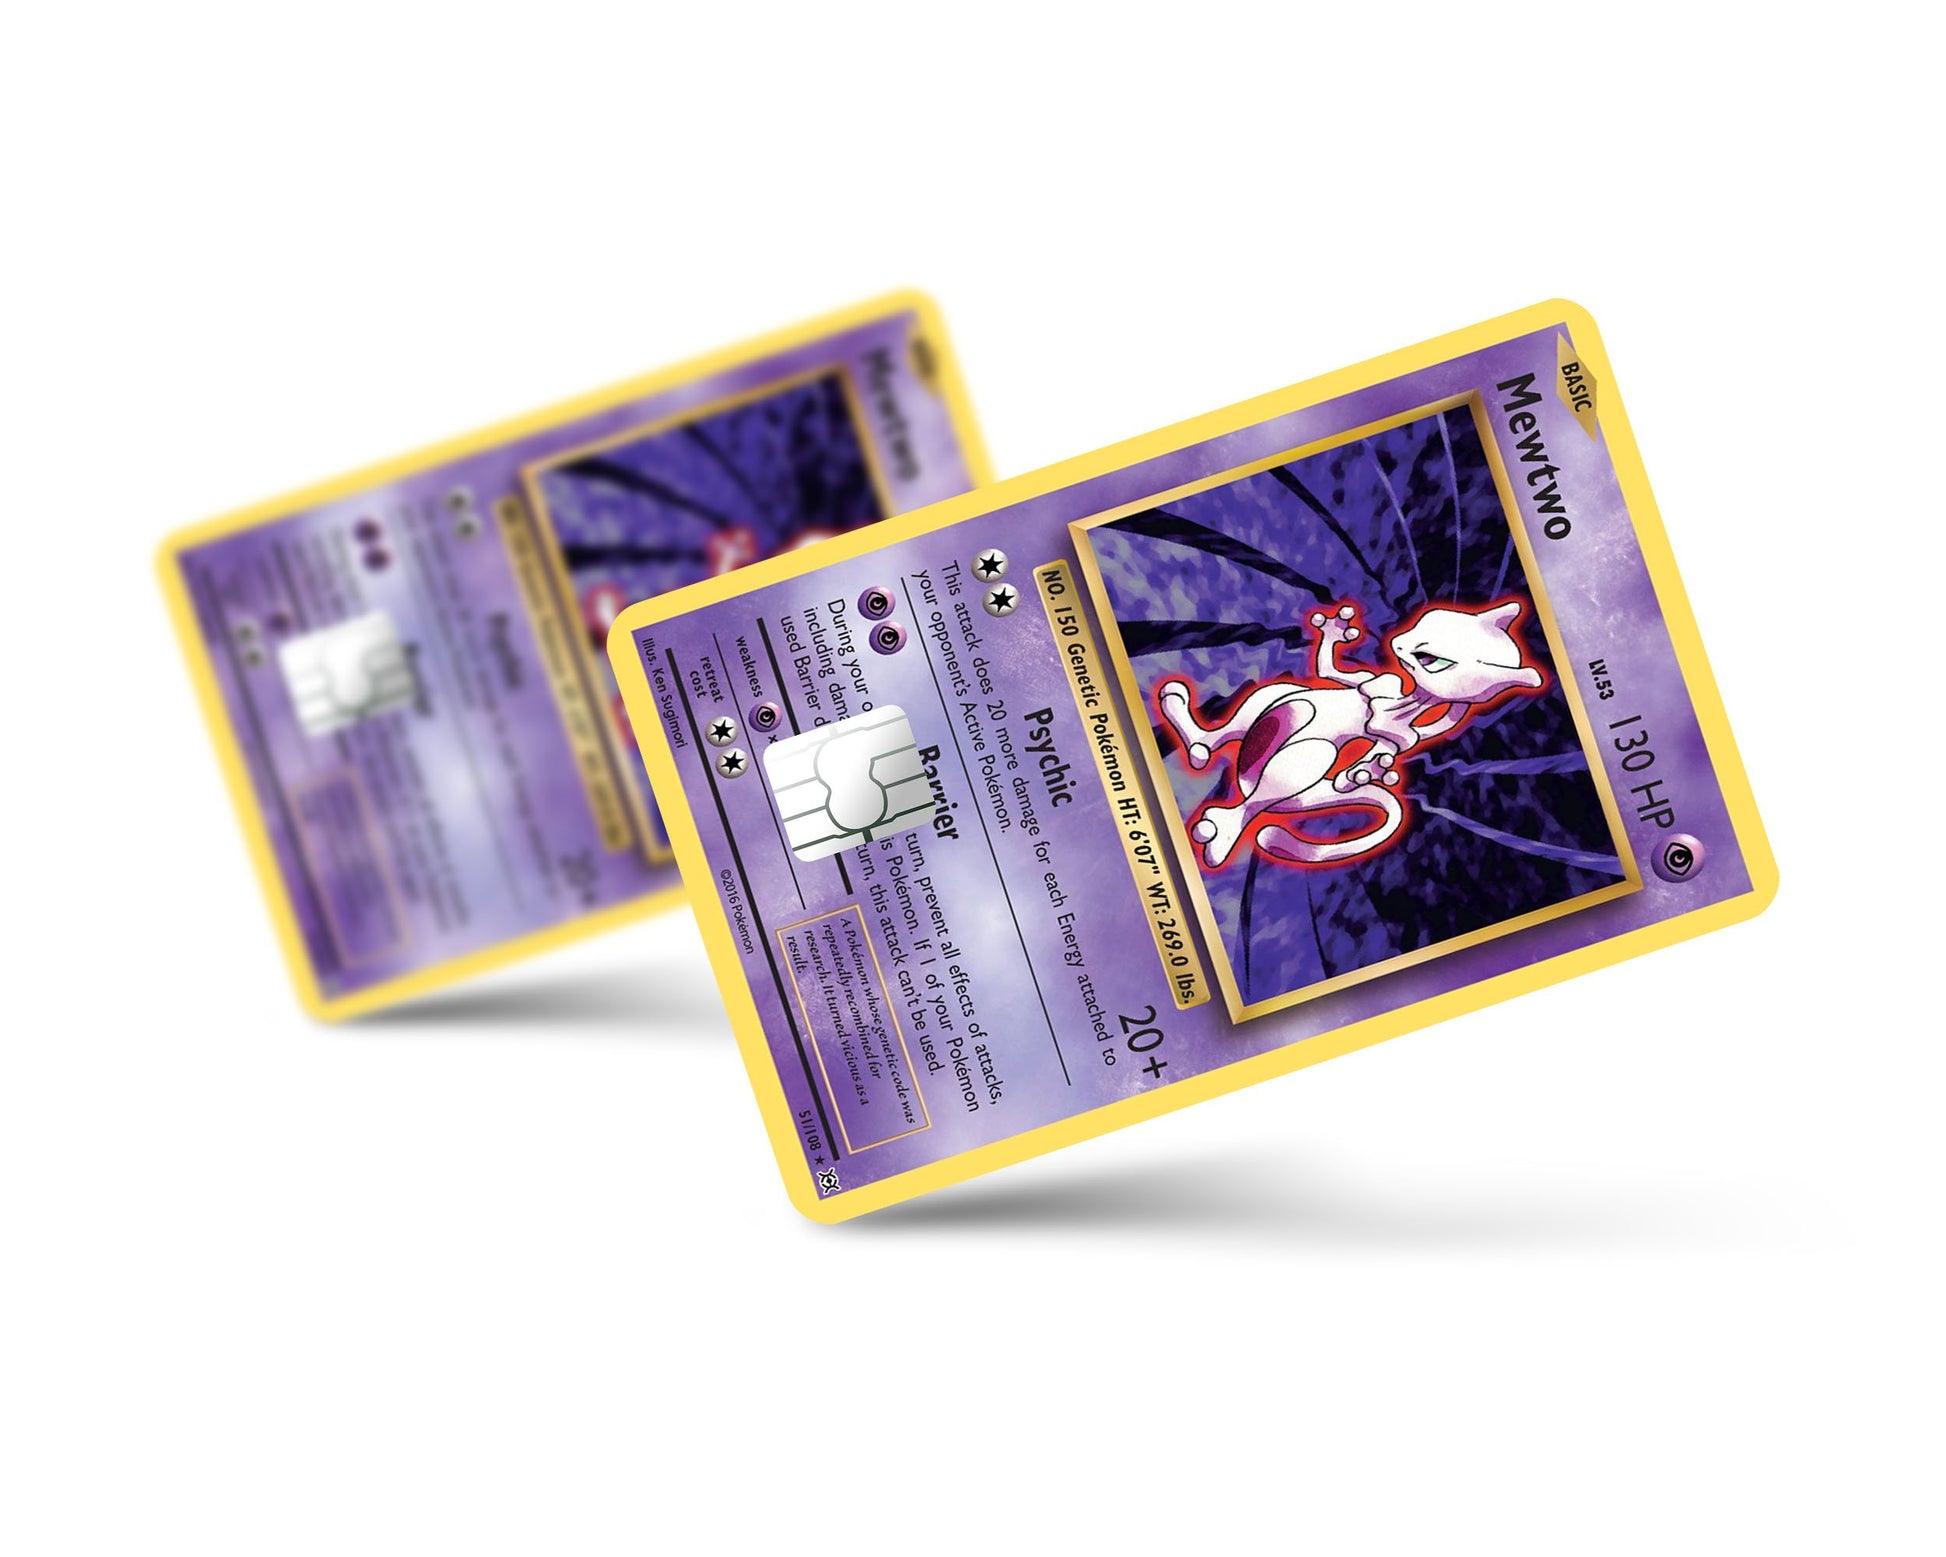 Mewtwo 51/108 Pokémon card from Evolutions for sale at best price